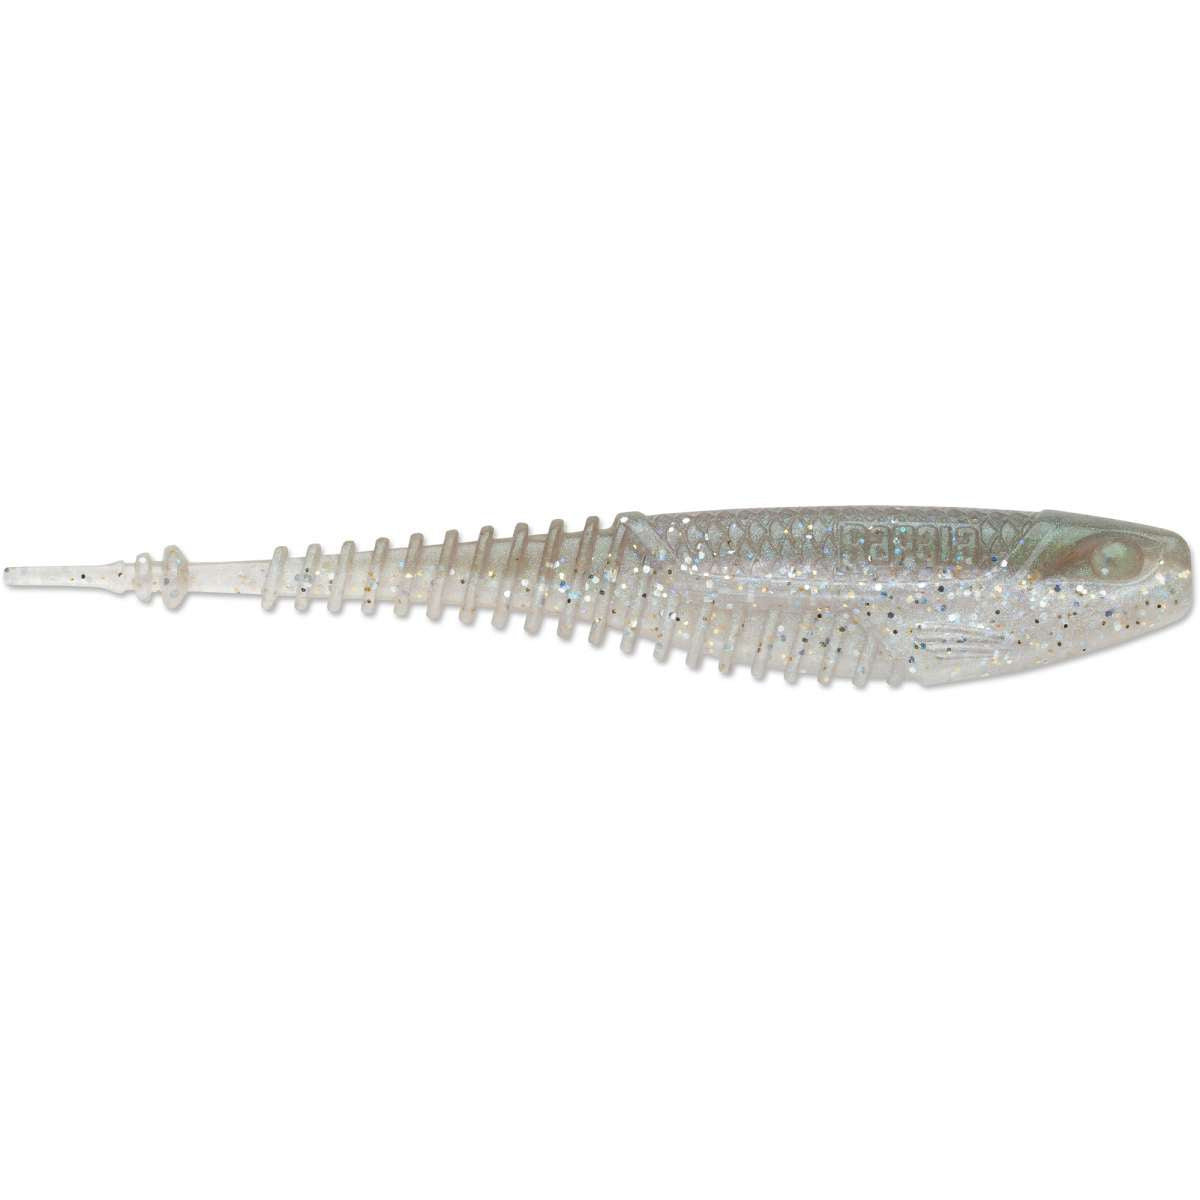 Rapala CrushCity Freeloader, 4.25", Salt/Scent Infused, 6 Per Package,